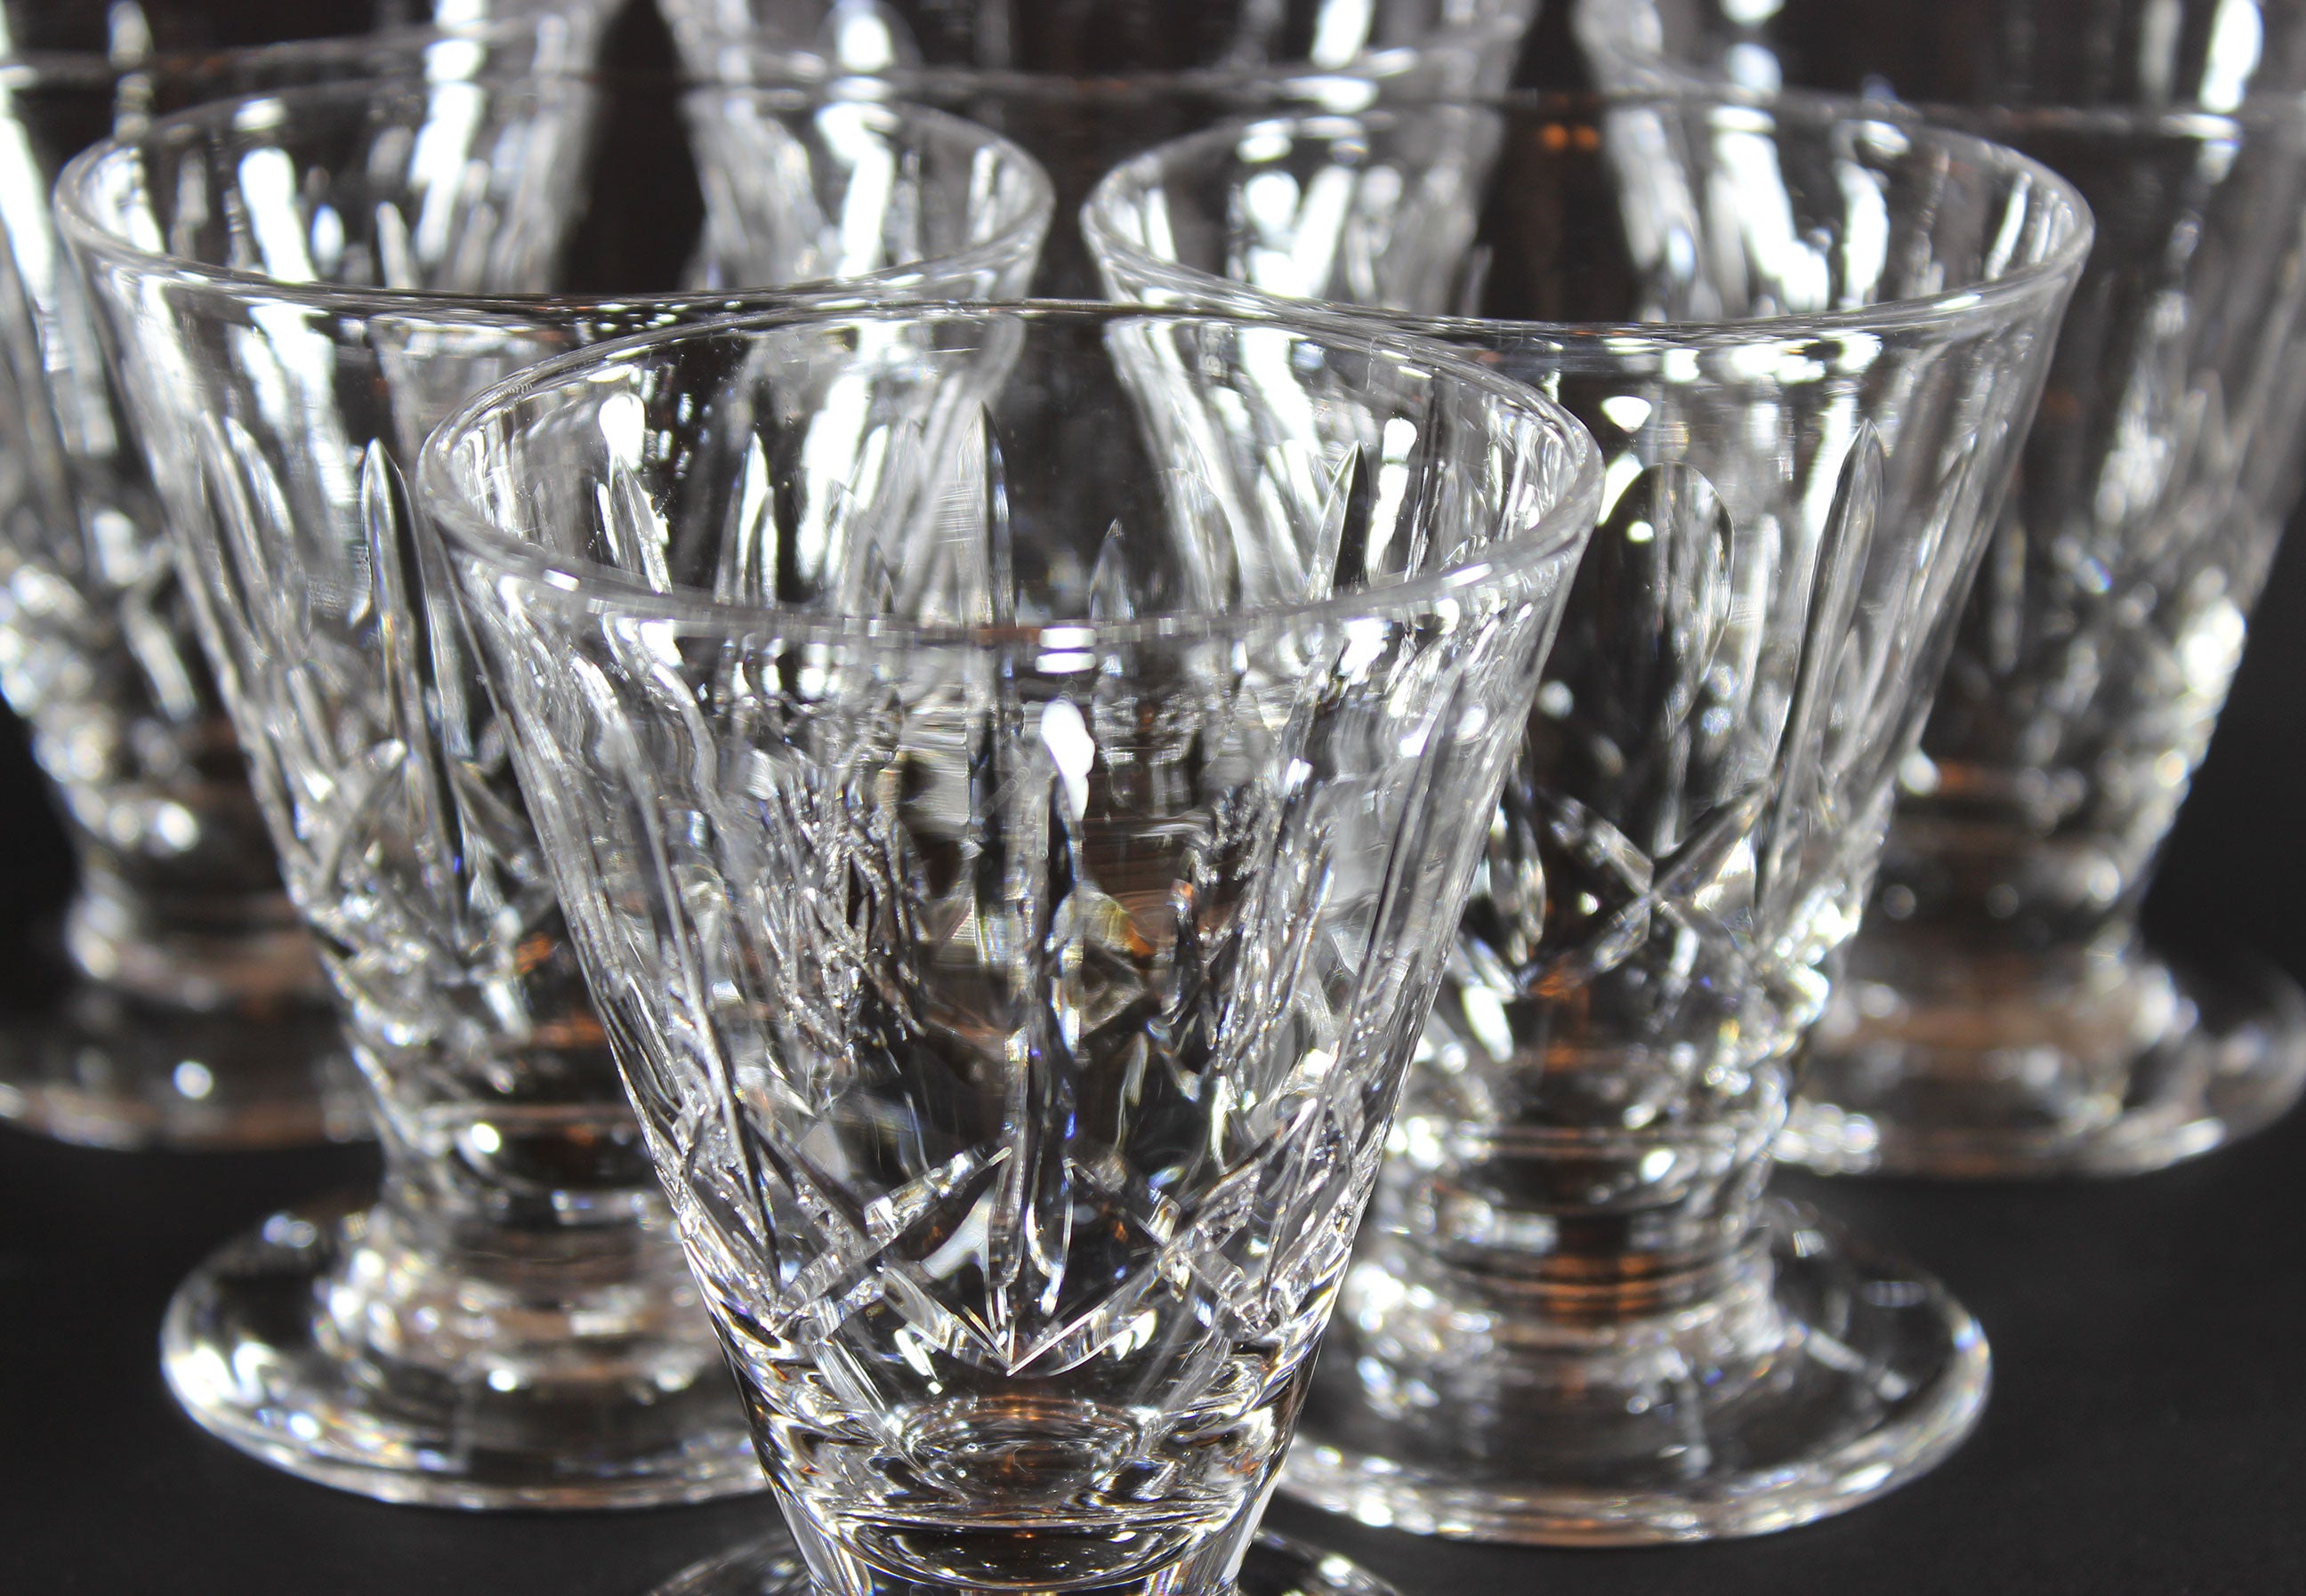 Cross and Olive Footed Juice Glass